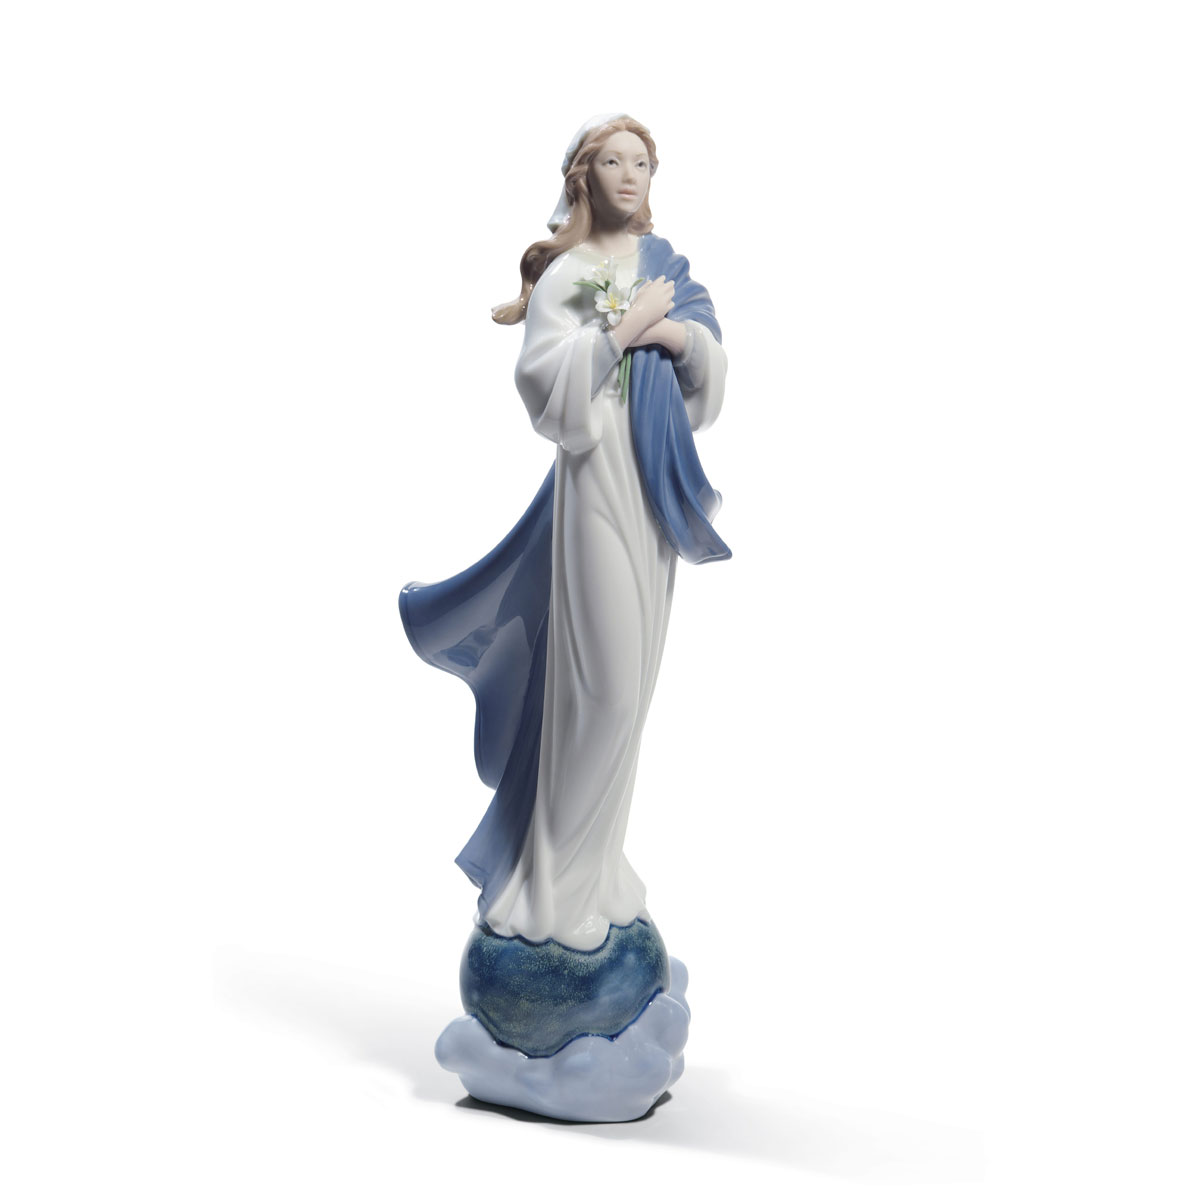 Lladro Classic Sculpture, Blessed Virgin Mary Figurine